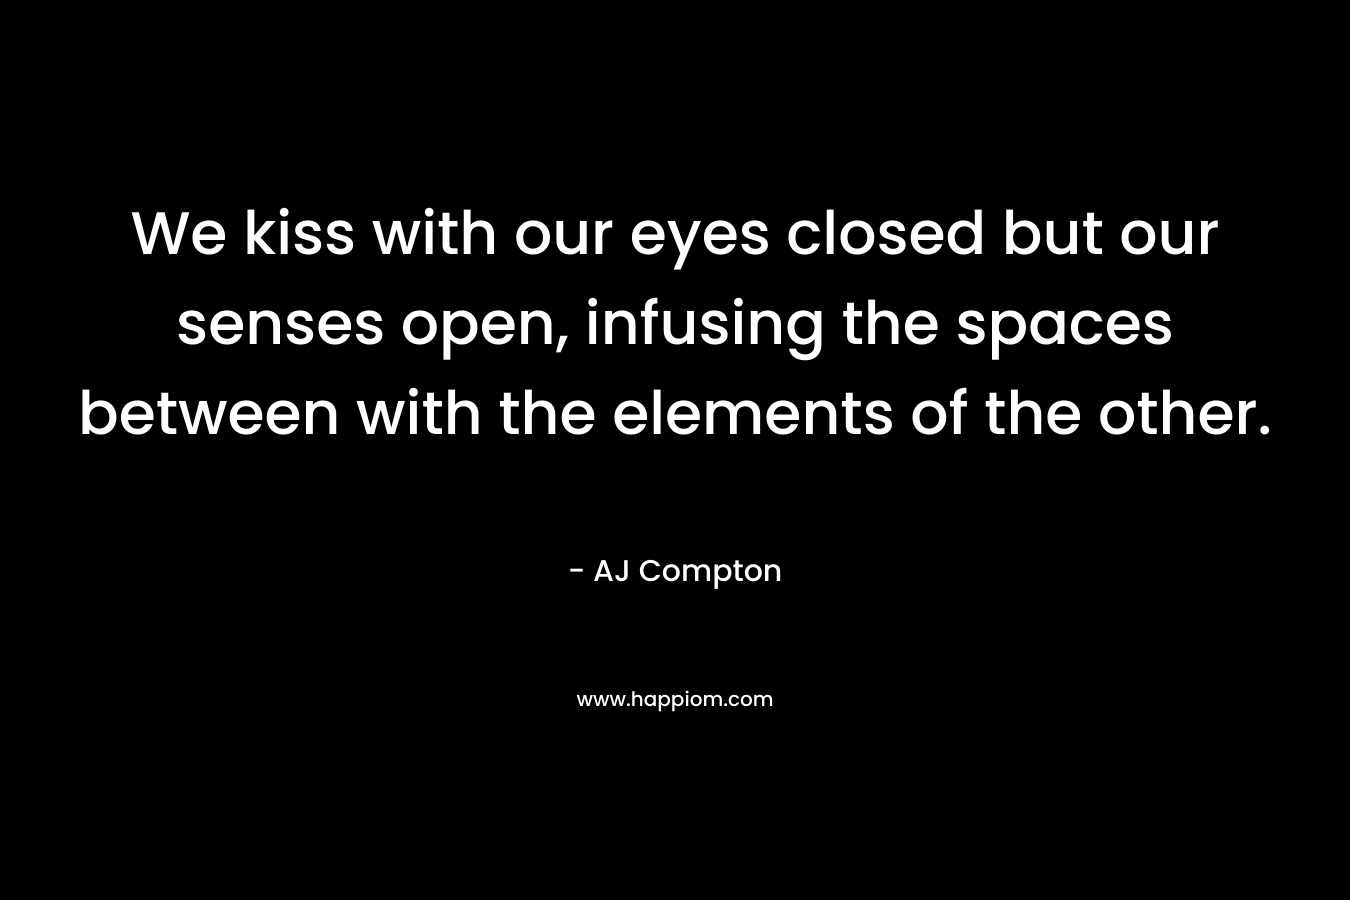 We kiss with our eyes closed but our senses open, infusing the spaces between with the elements of the other. – AJ Compton